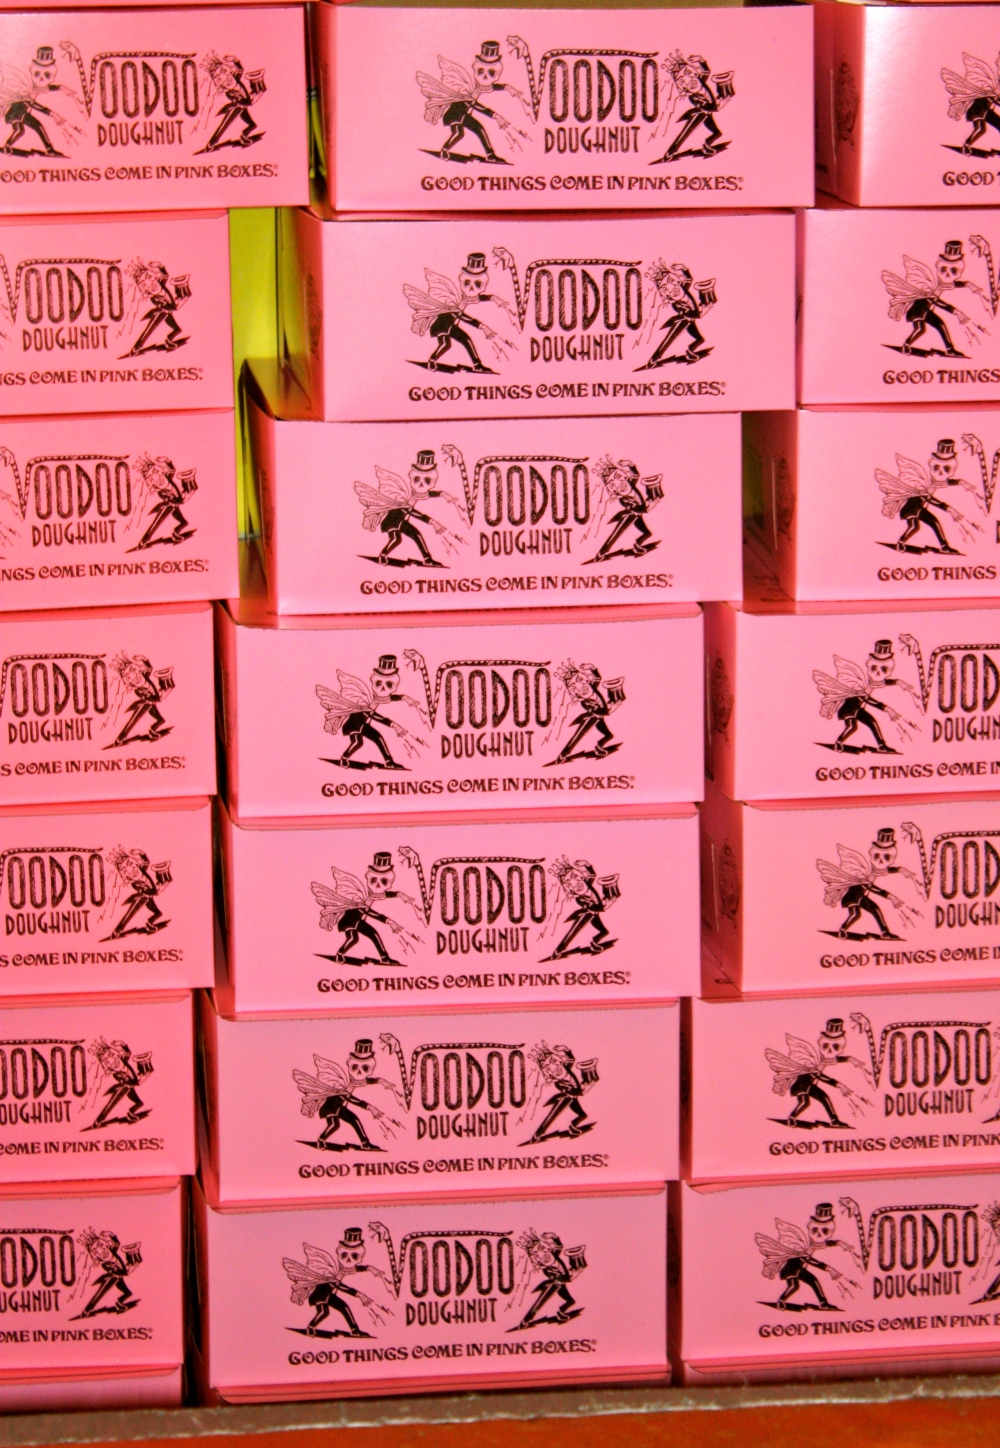 Good things come in pink boxes.